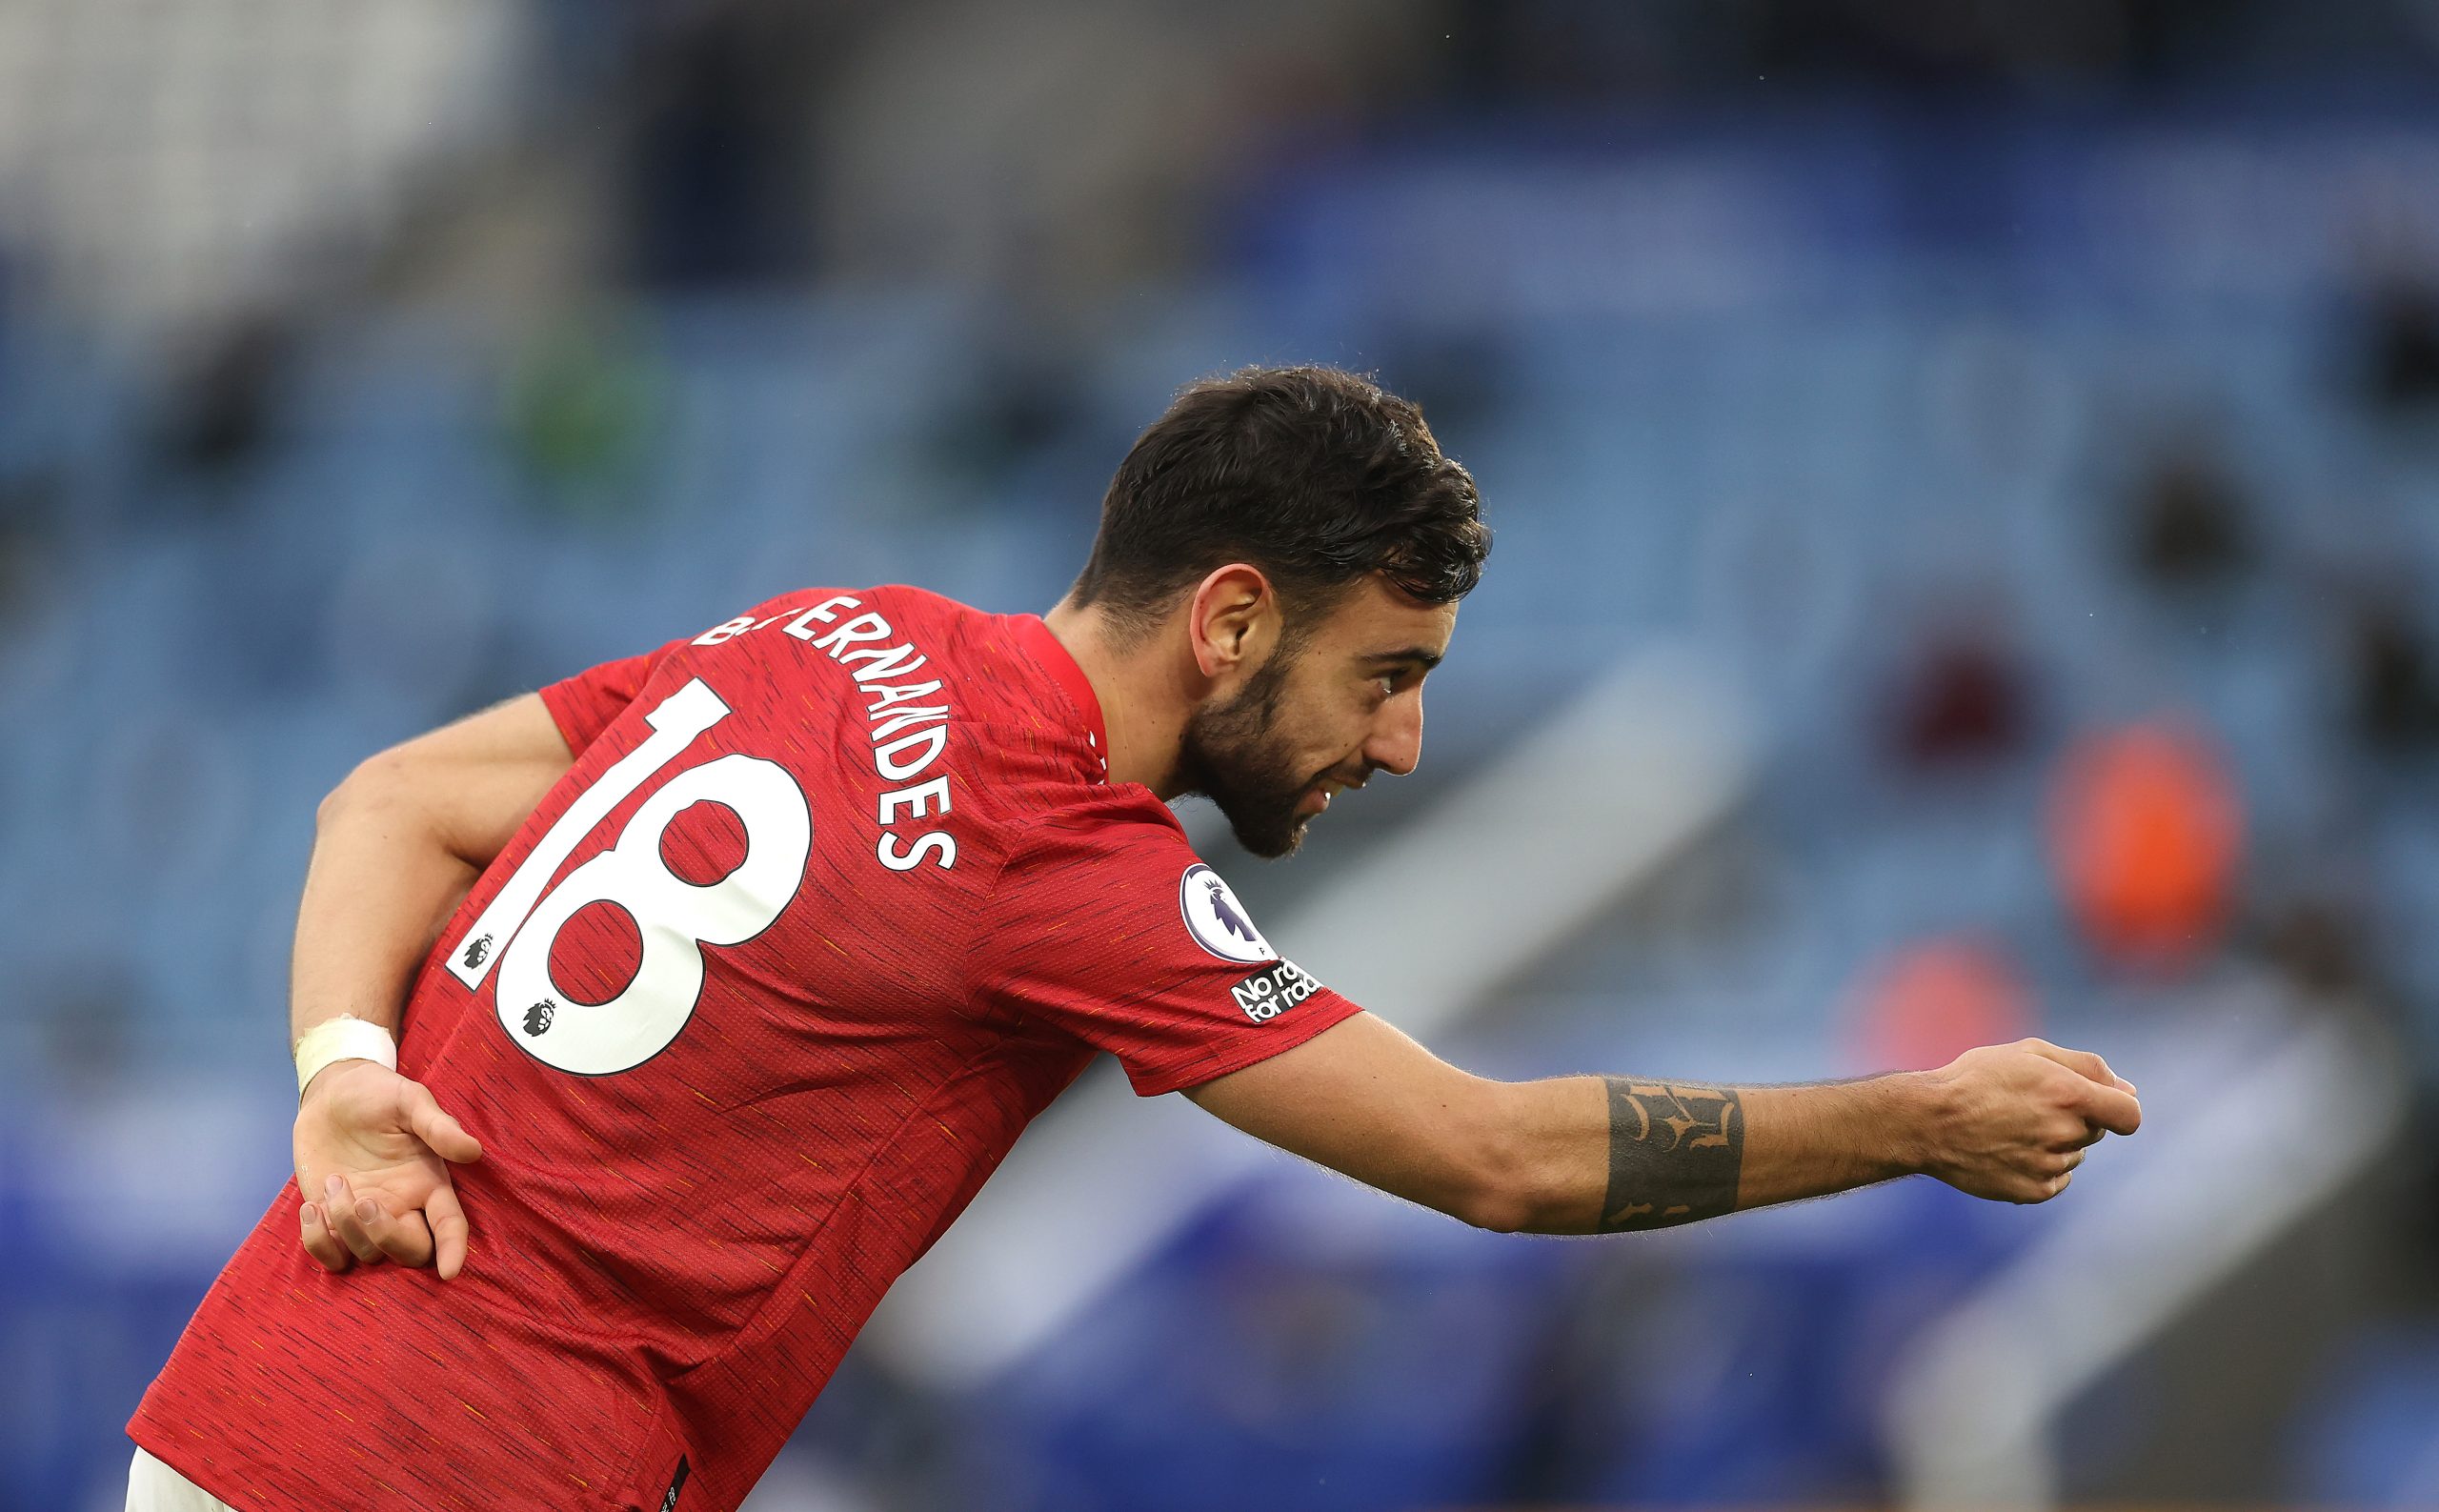 Bruno Fernandes is in great form for Manchester United ahead of their FA Cup tie against Liverpool. (GETTY Images)